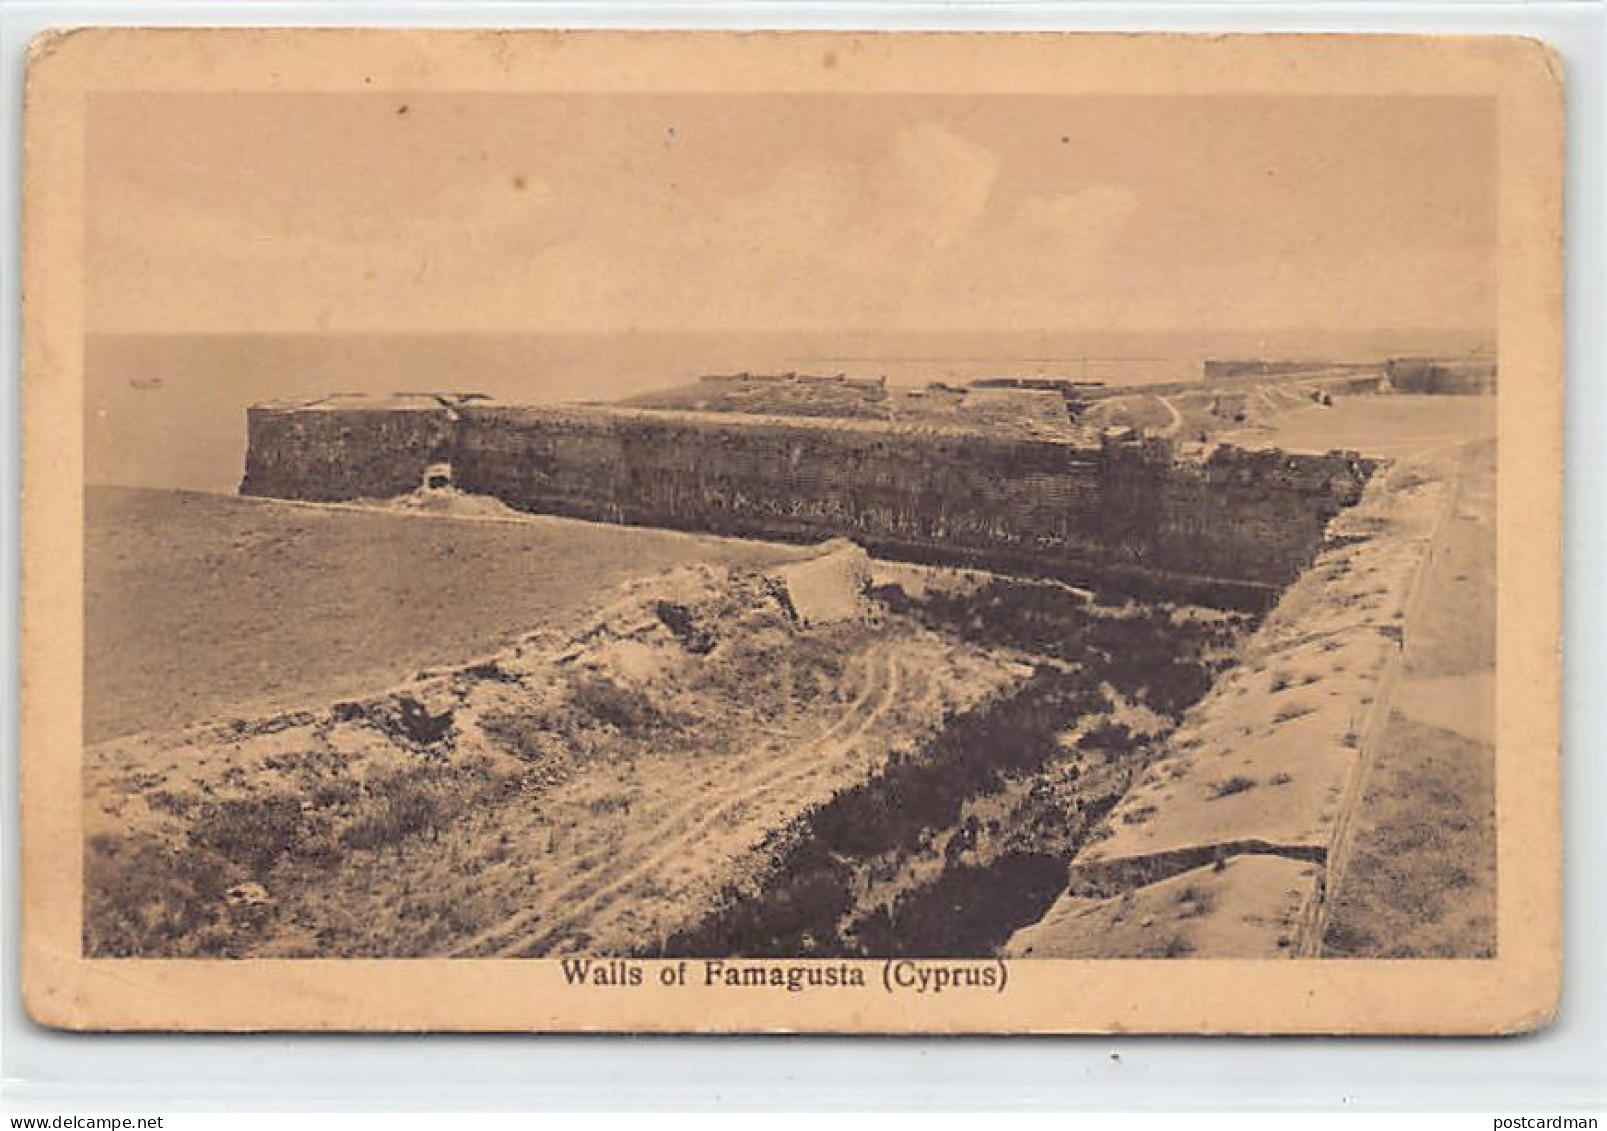 Cyprus - Walls At Famagusta - SEE SCANS FOR CONDITION - Publ. Mangoian Bros. 372 - Zypern